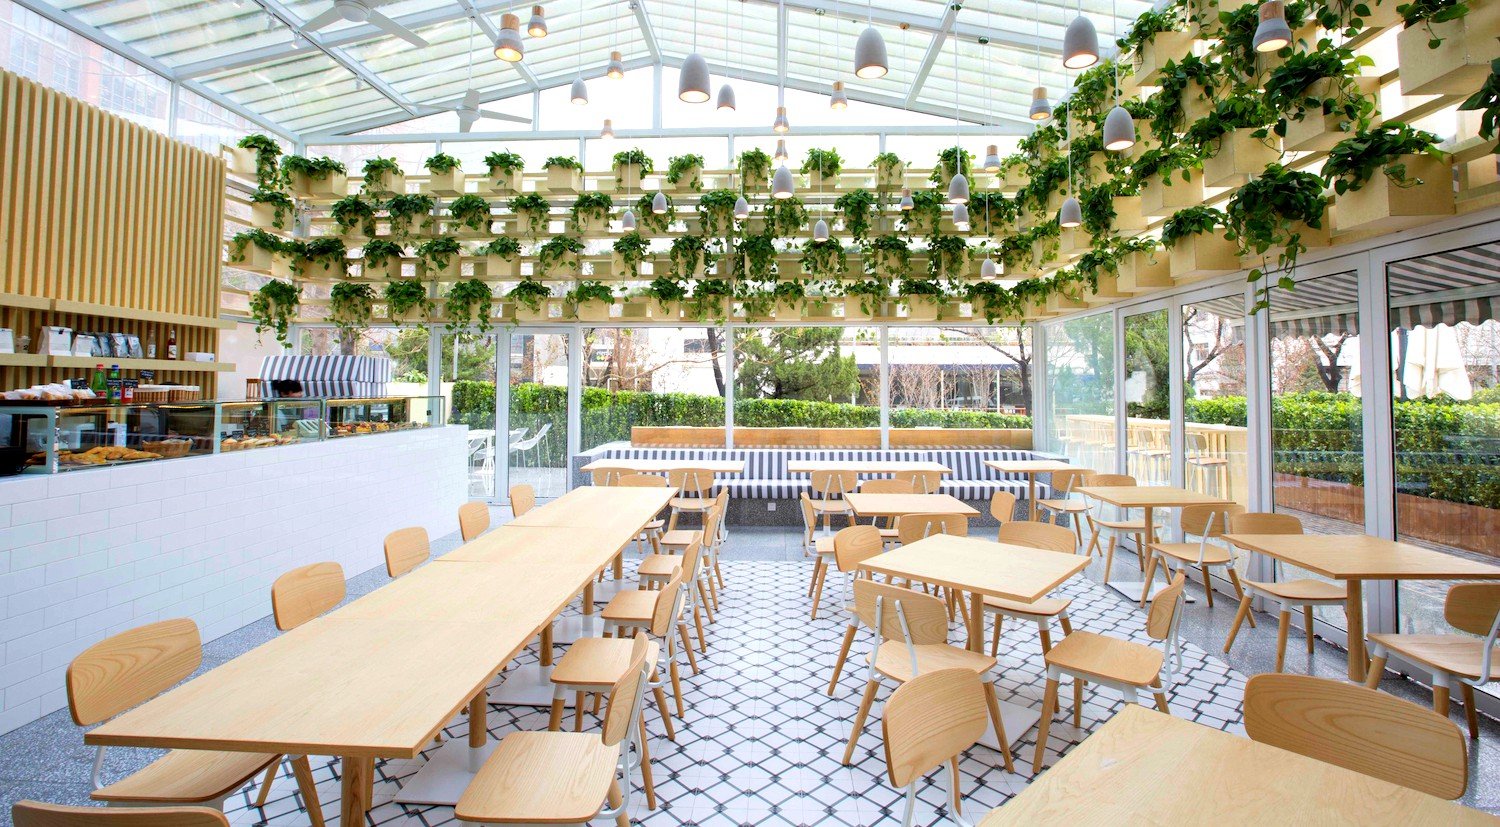 Coffee Shop Cool: Design Inspiration from the Most Instagrammable Cafes